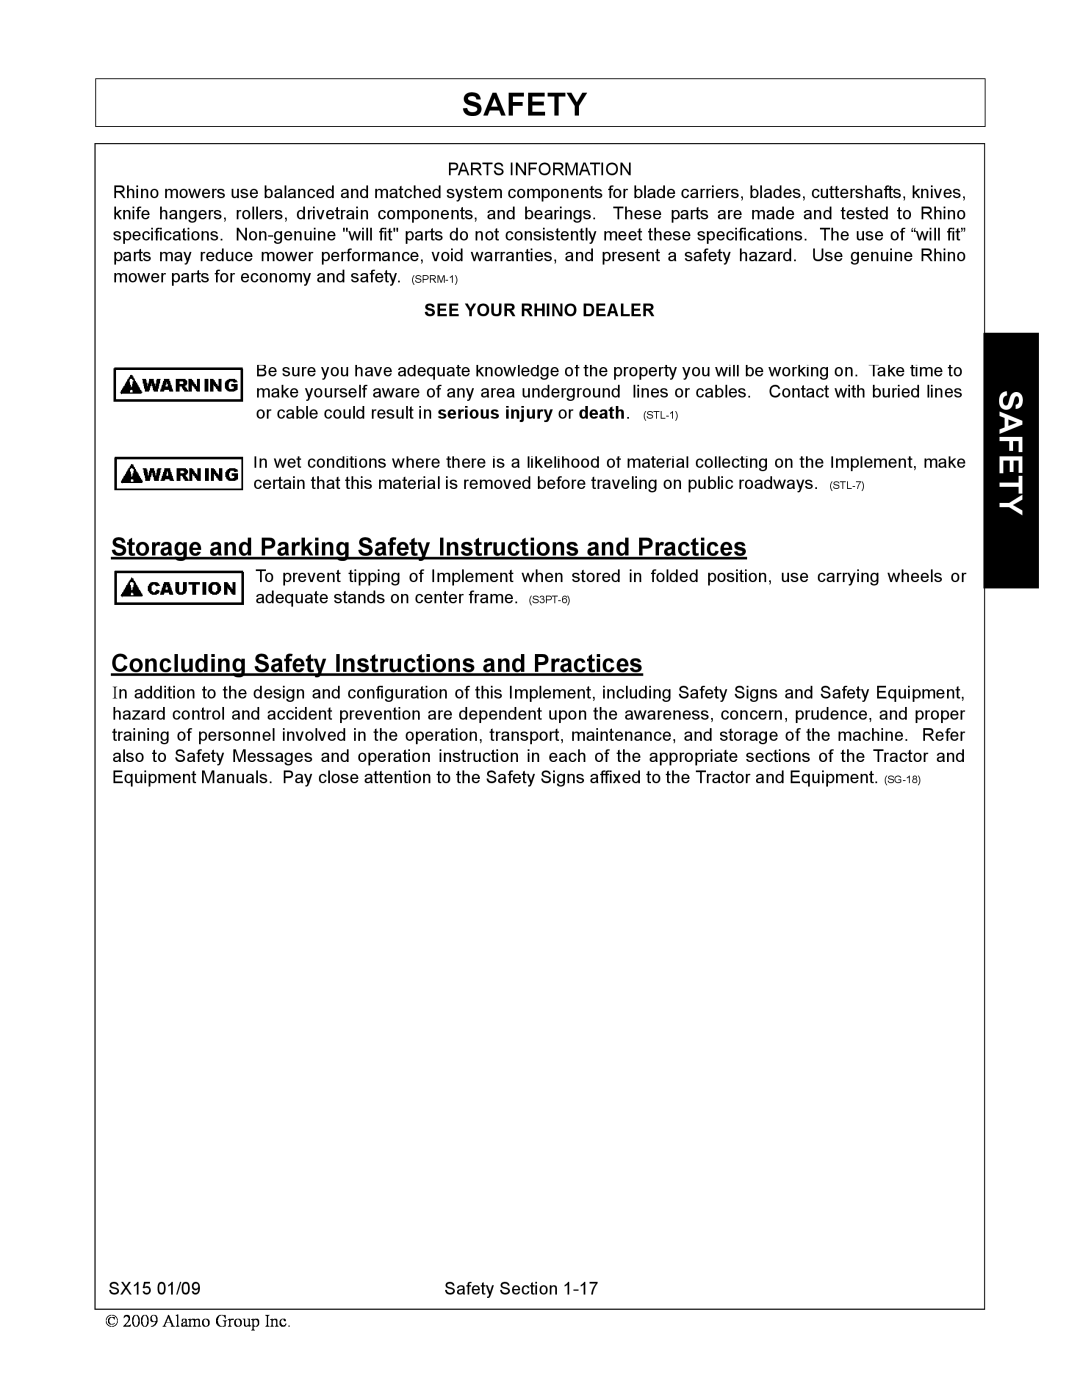 Alamo SX15 manual Storage and Parking Safety Instructions and Practices, Concluding Safety Instructions and Practices 